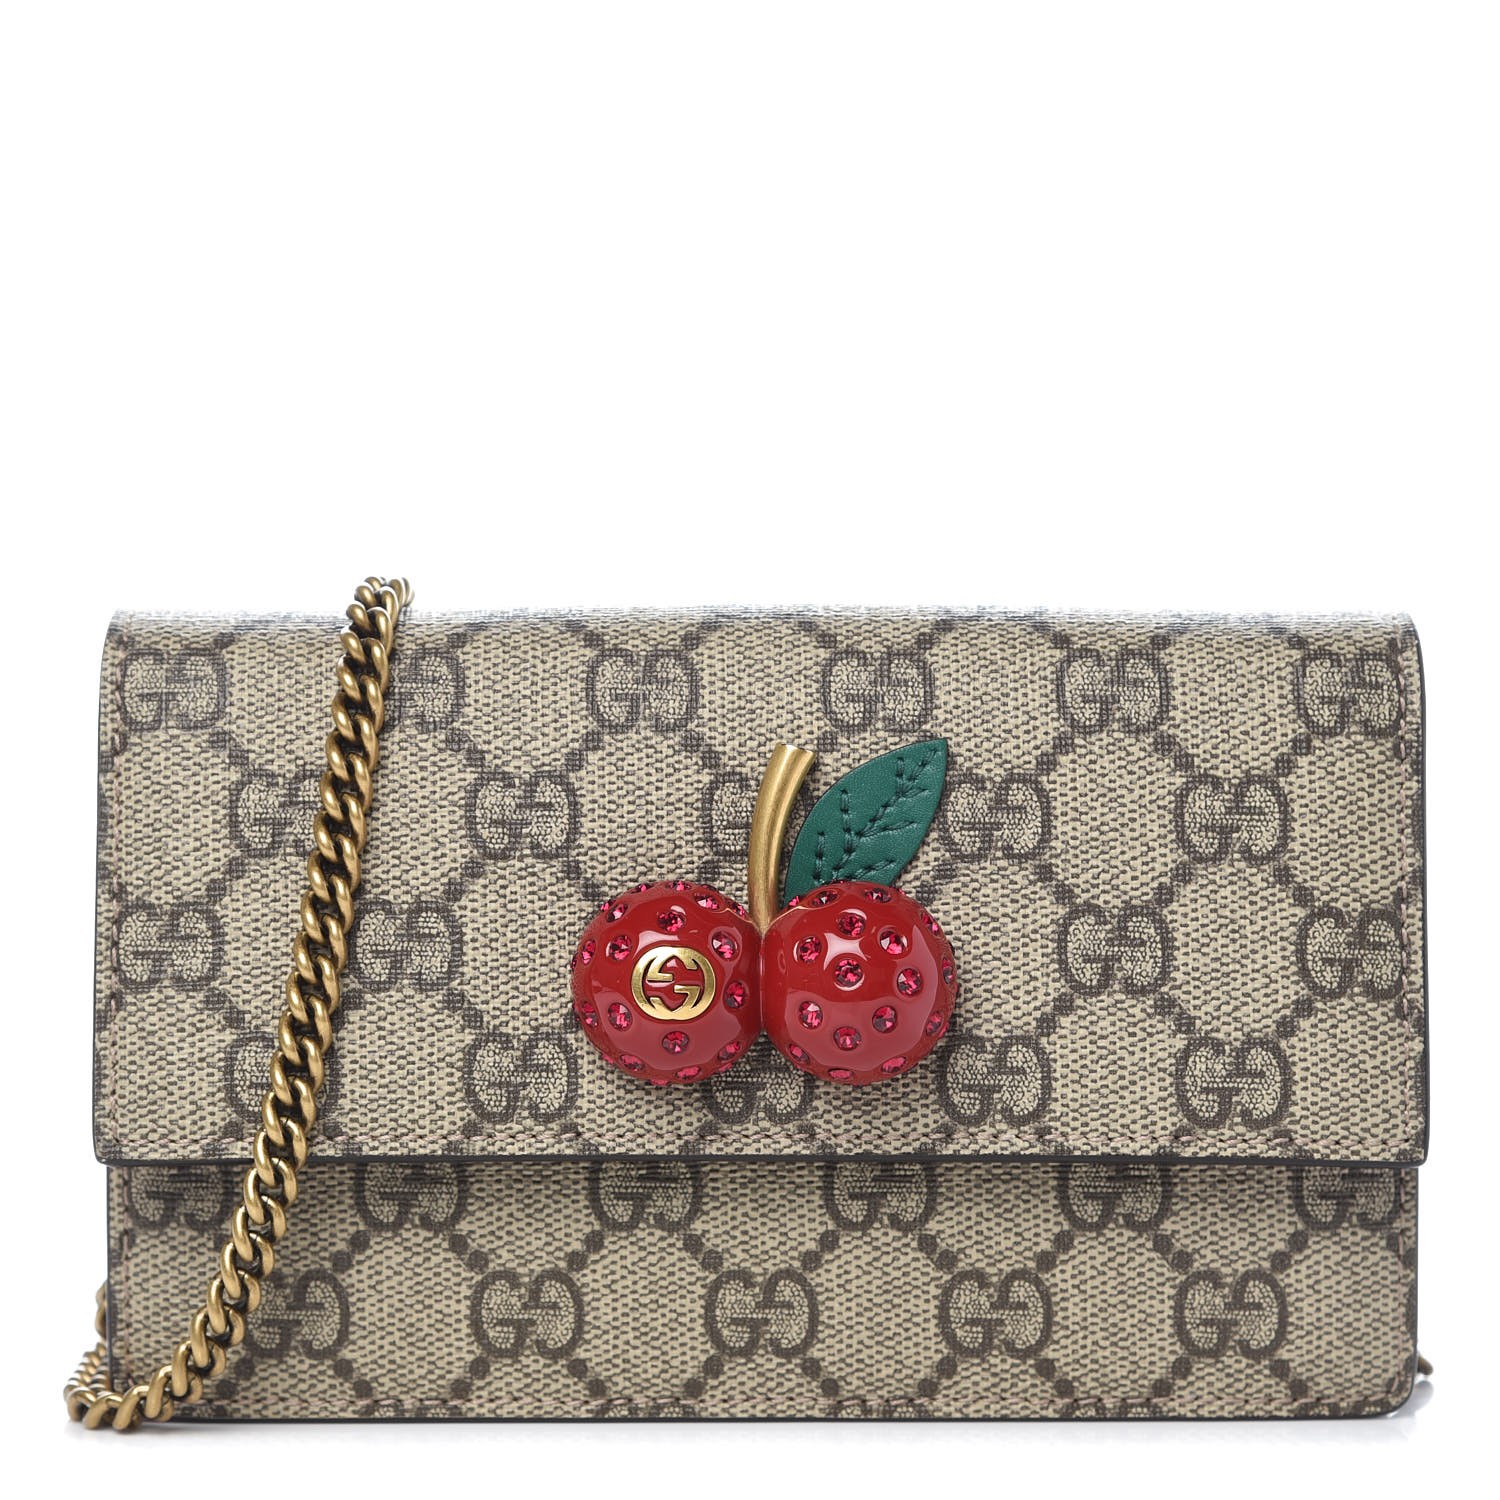 gucci wallet with cherries